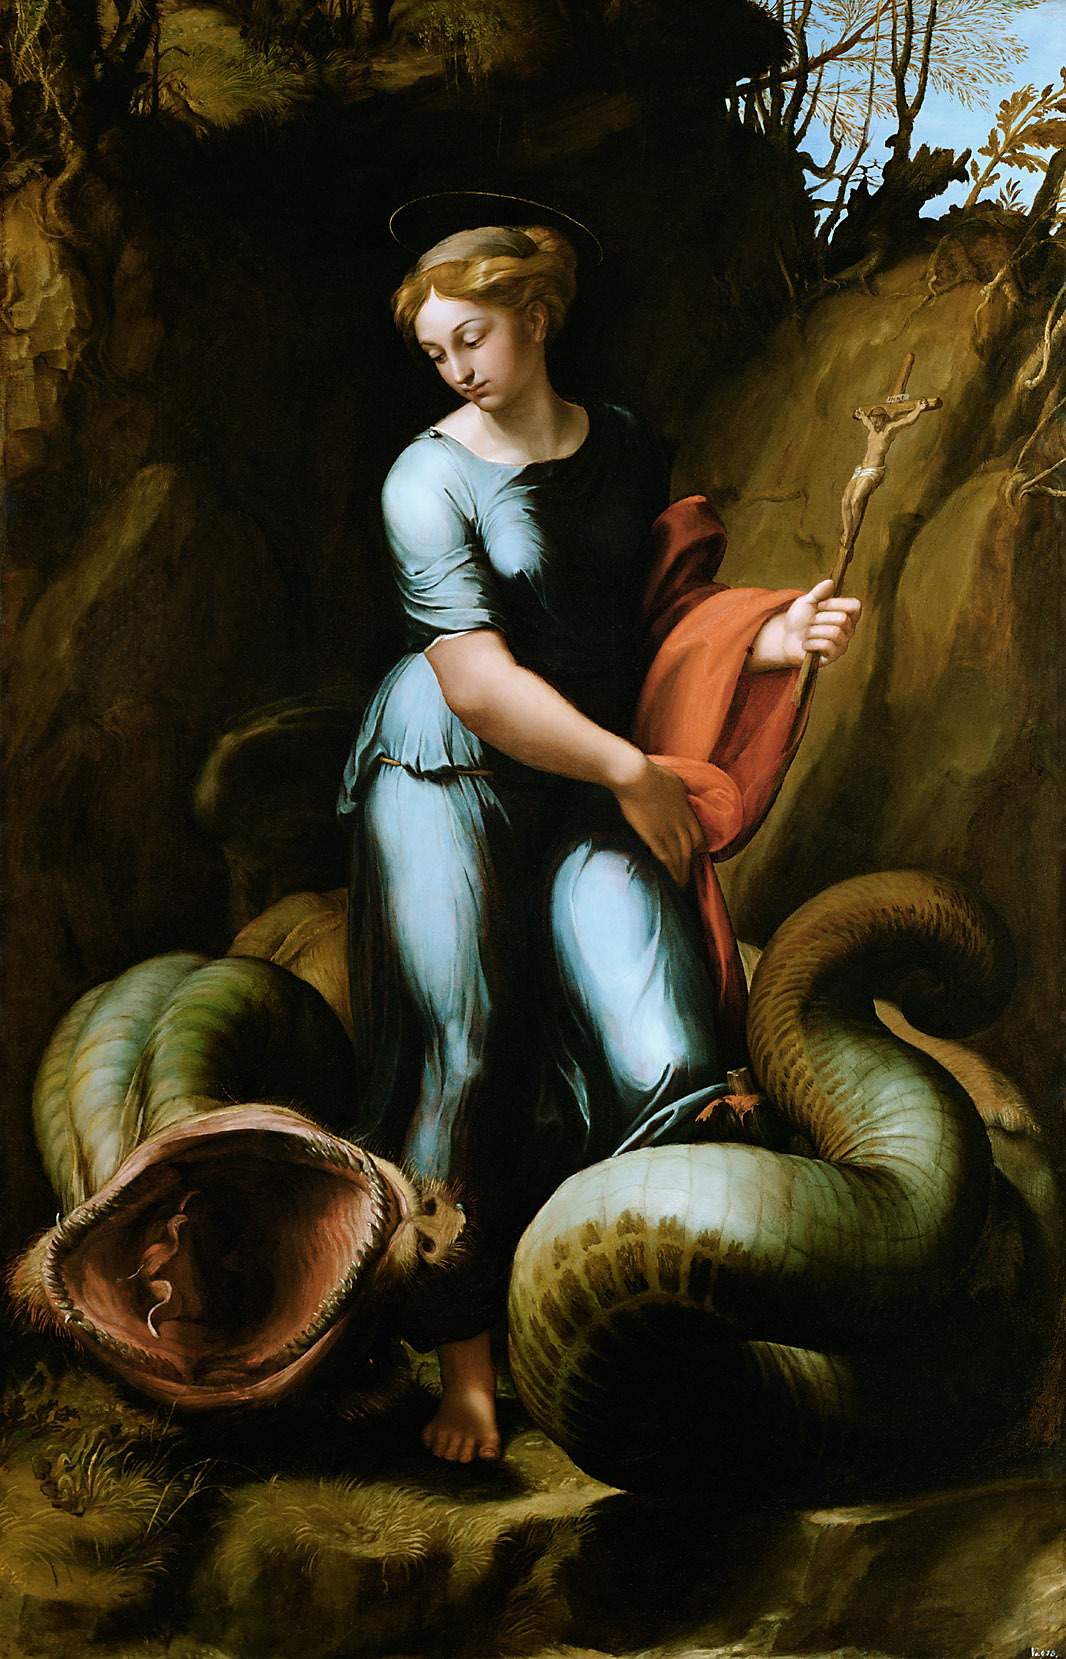 A woman known as Saint Margaret stands in a pit below the ground and carries a cross while looking downwards at a large snake creature.